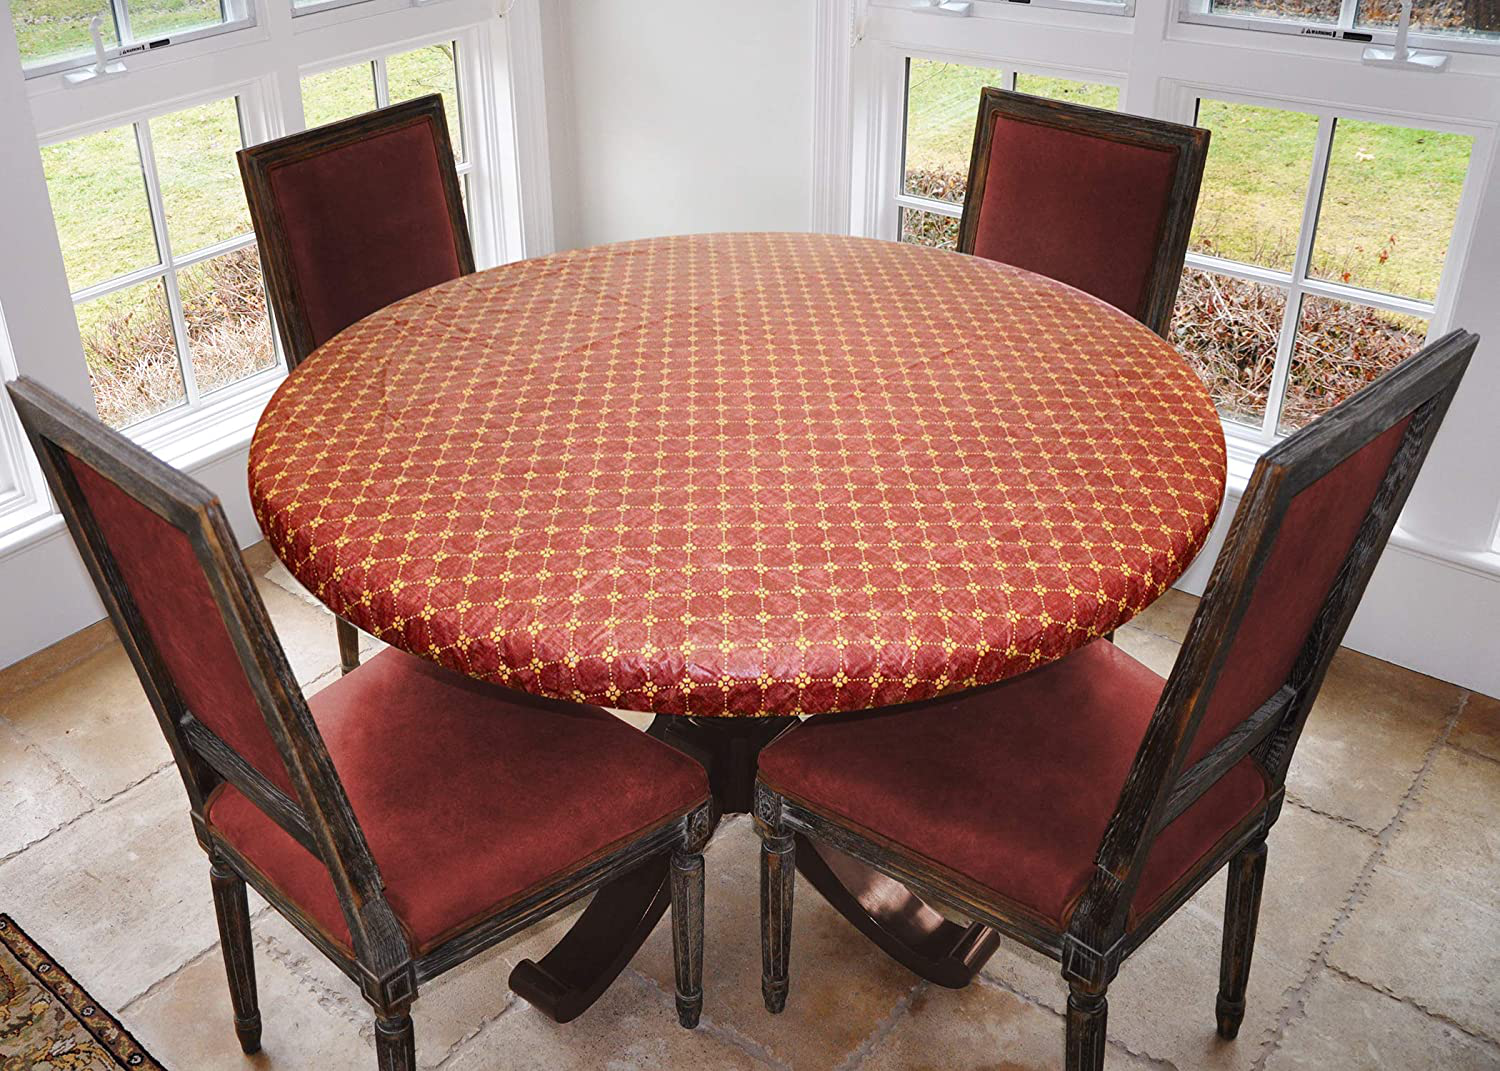 Covers For The Home Deluxe Elastic Edged Flannel Backed Vinyl Fitted Table Cover - Antique Fruit Pattern - Small Round - Fits Tables up to 40" - 44" Diameter